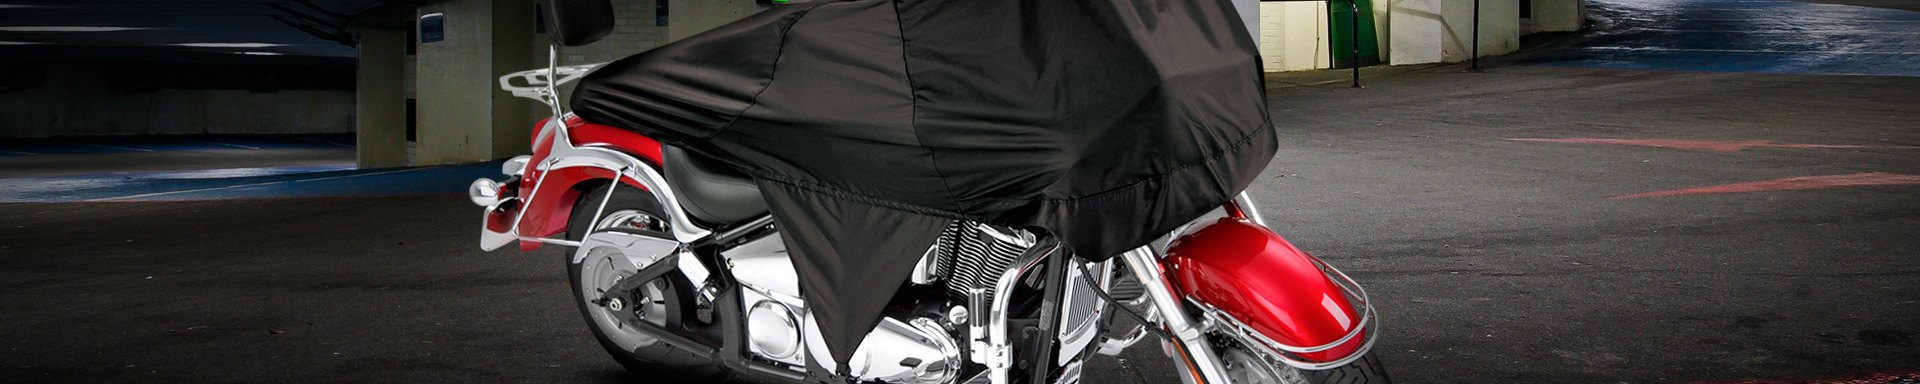 Choosing The Best Cover For Your Motorcycle